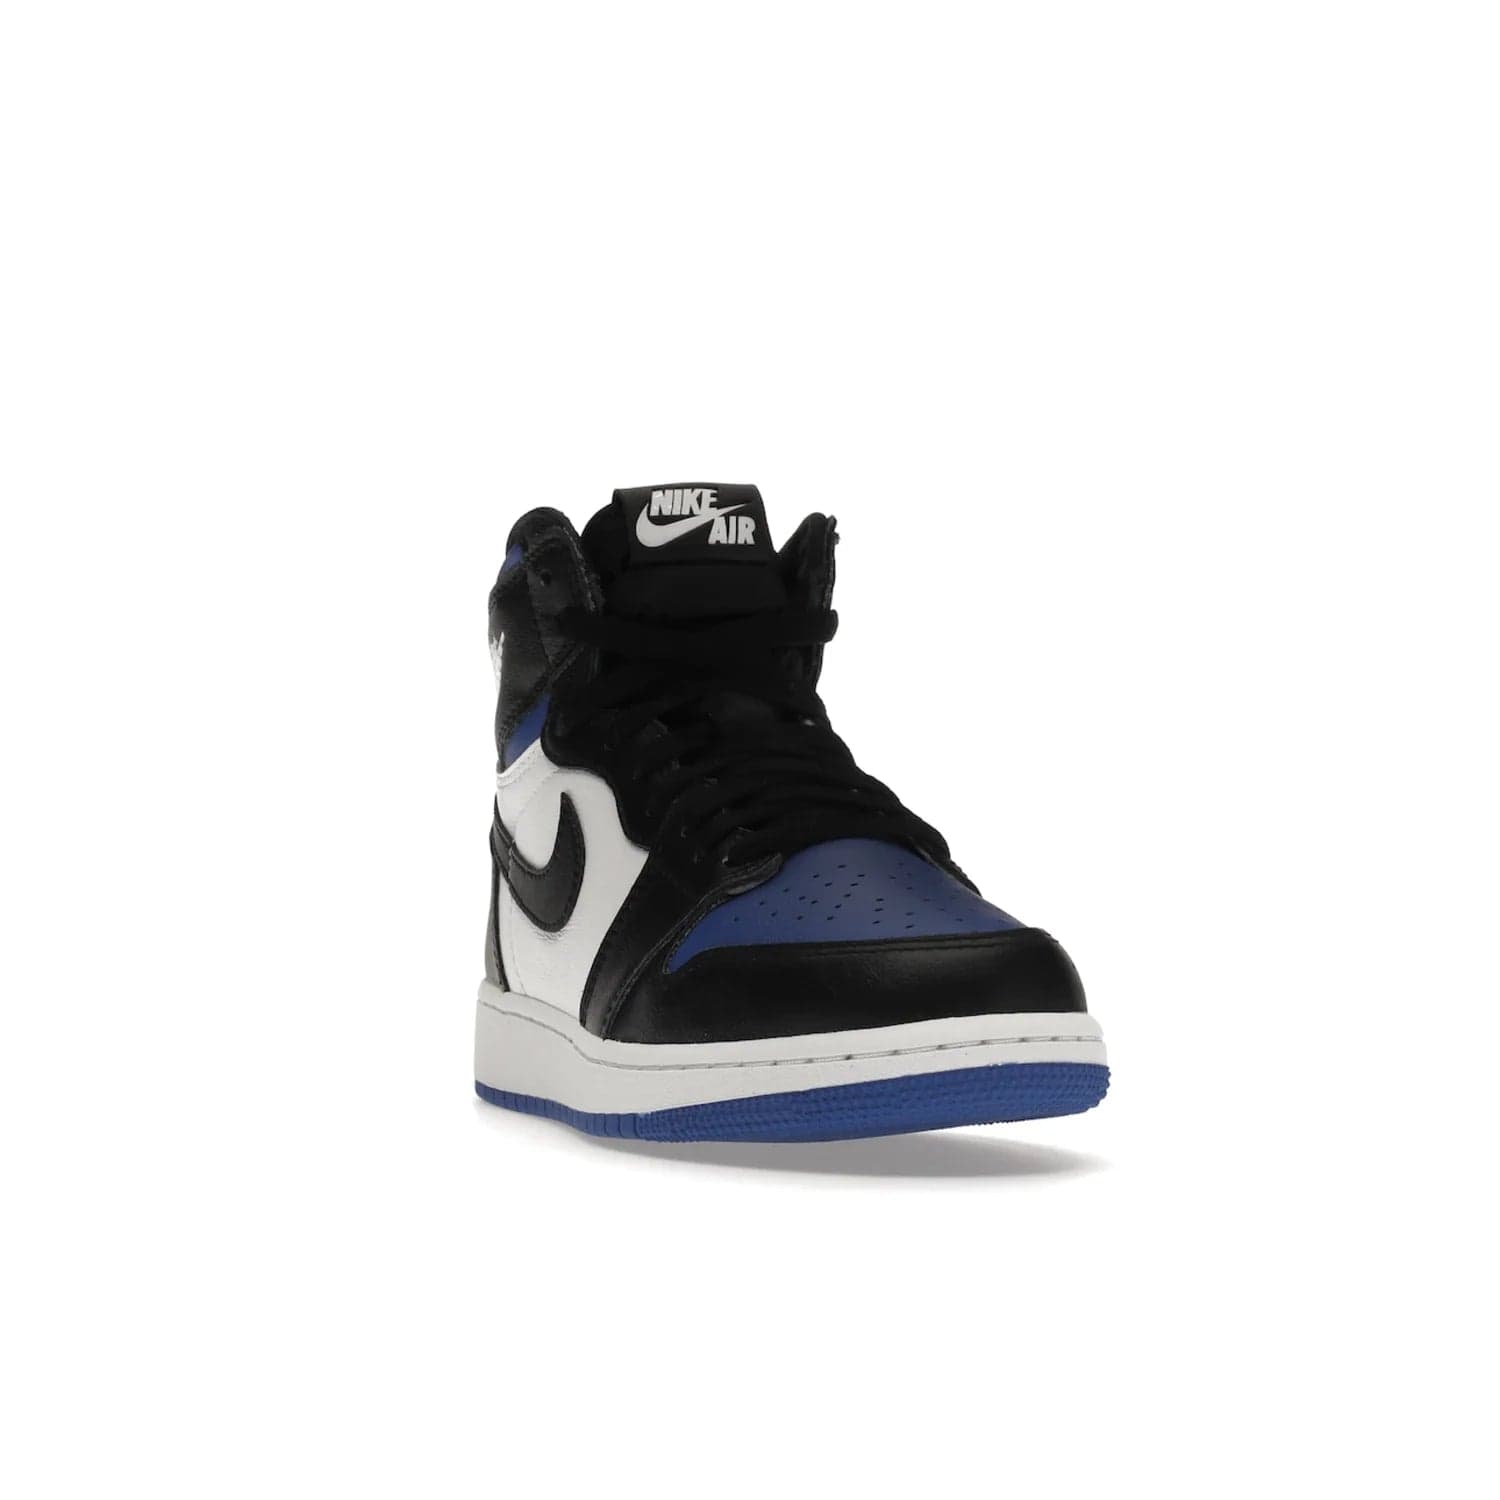 Jordan 1 Retro High Royal Toe (GS) - Image 8 - Only at www.BallersClubKickz.com - Take your sneaker wardrobe to the next level with the Jordan 1 Retro High Royal Toe (GS). Combining classic design with a luxurious white and royal blue leather upper, a textured black Swoosh and a tapered outsole. Stand out with the Air Jordan Wings logo near the heel.